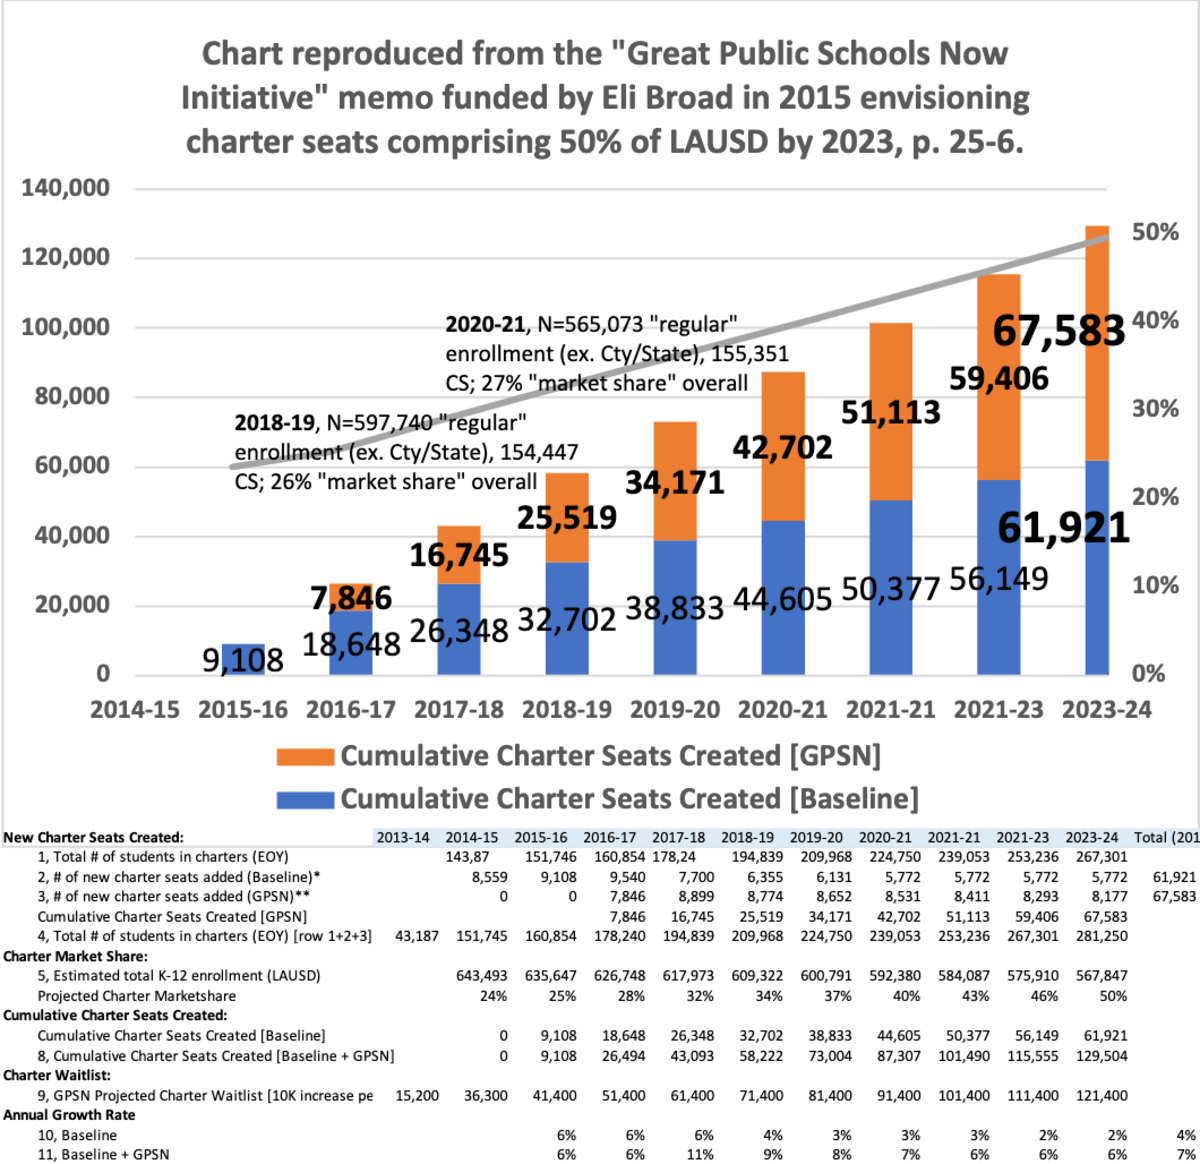 Figure 2: Annotated re-creation of chart and graph from the 2015 Broad-funded Great Public Schools Now Initiative to achieve 50% “market share” of charter school “seats” by the year 2023.